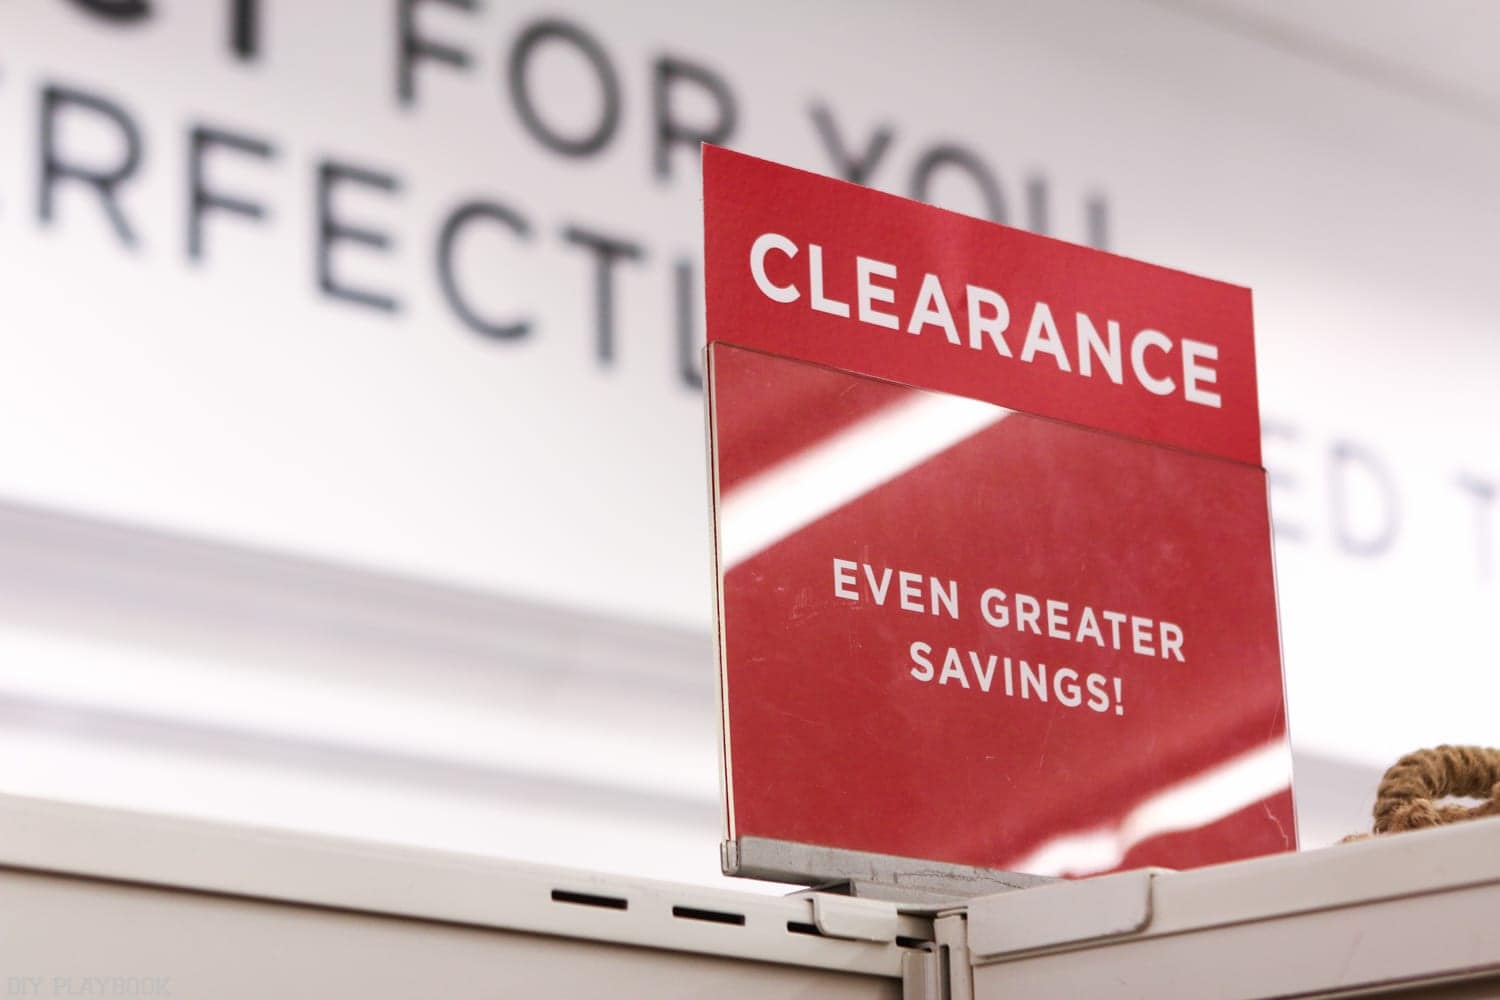 Give the clearance a shot- you can find some great items buried in there